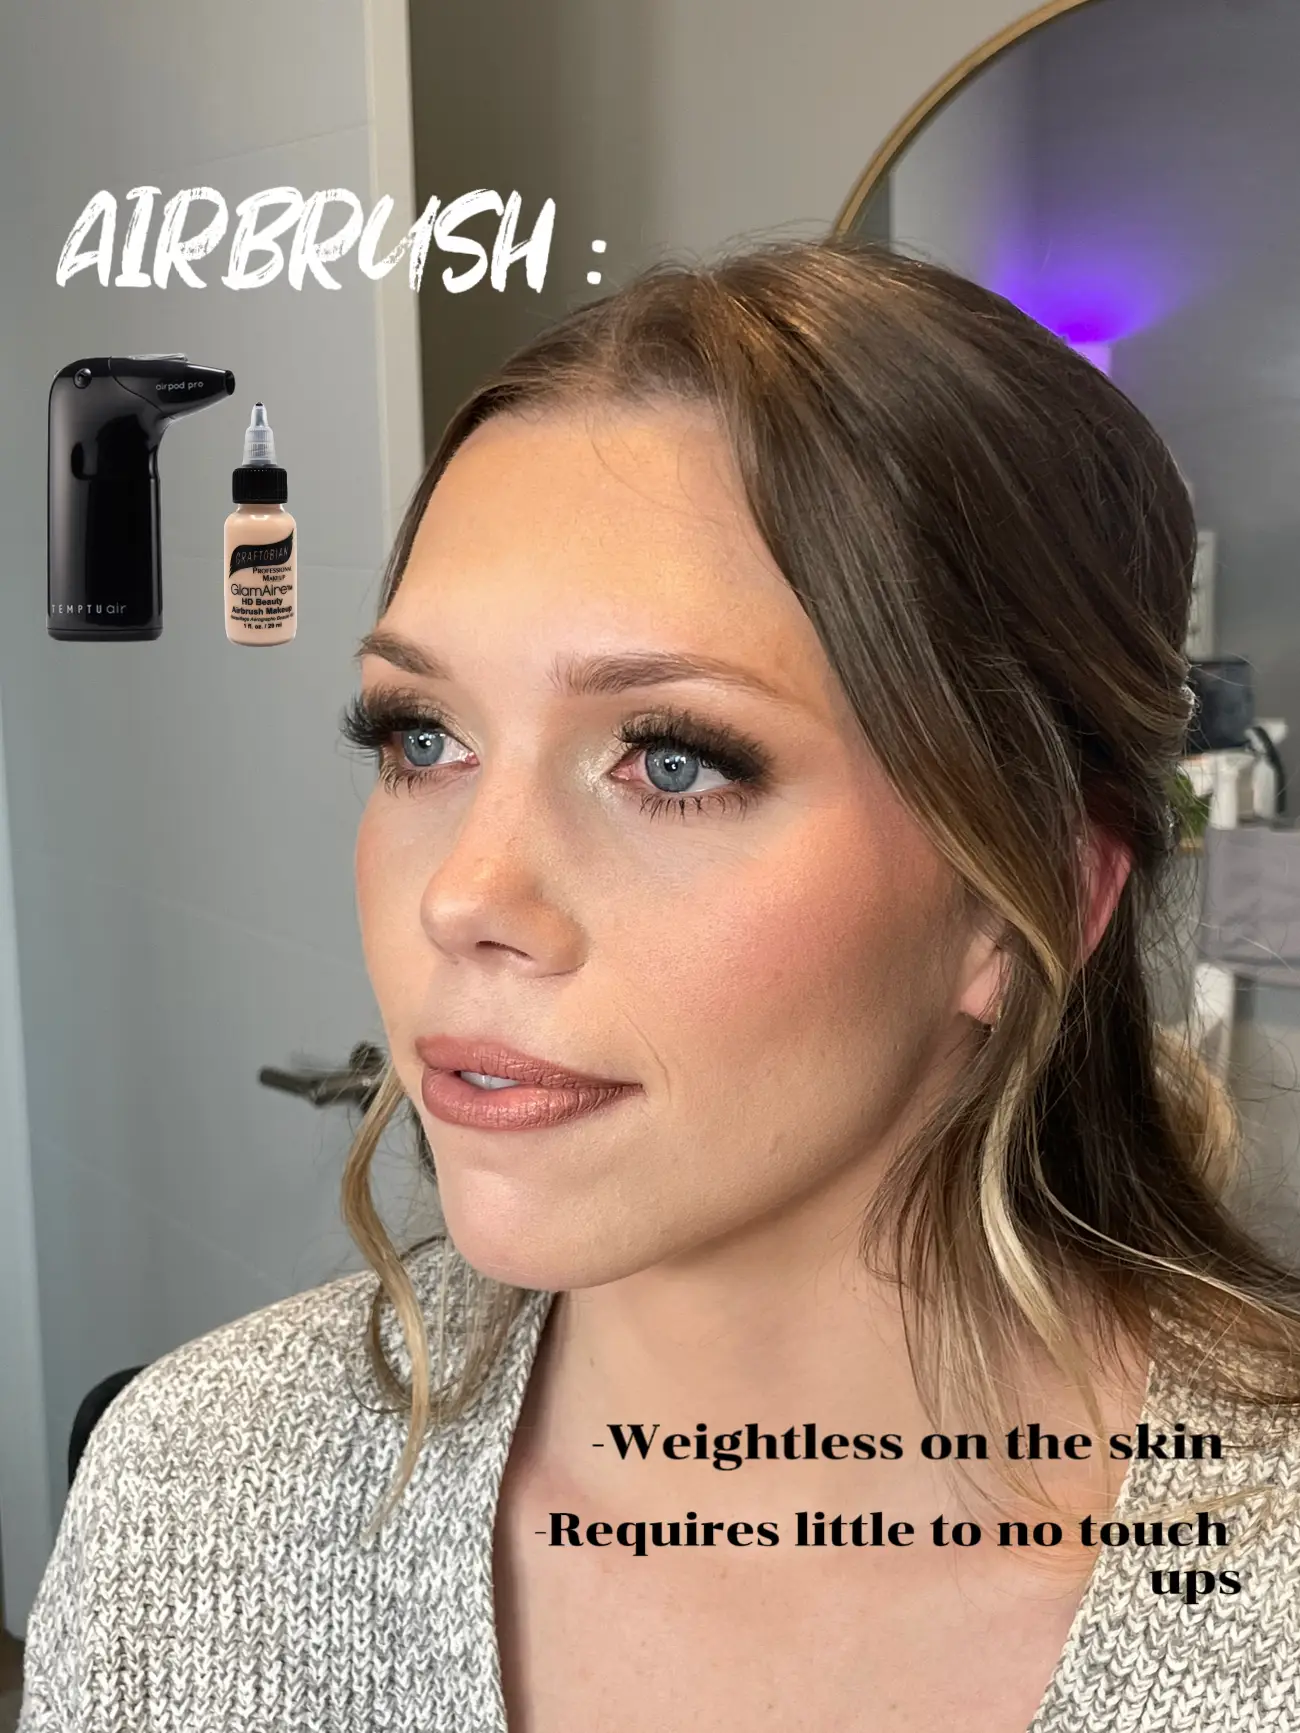 The Differences Between Traditional and Airbrush Makeup